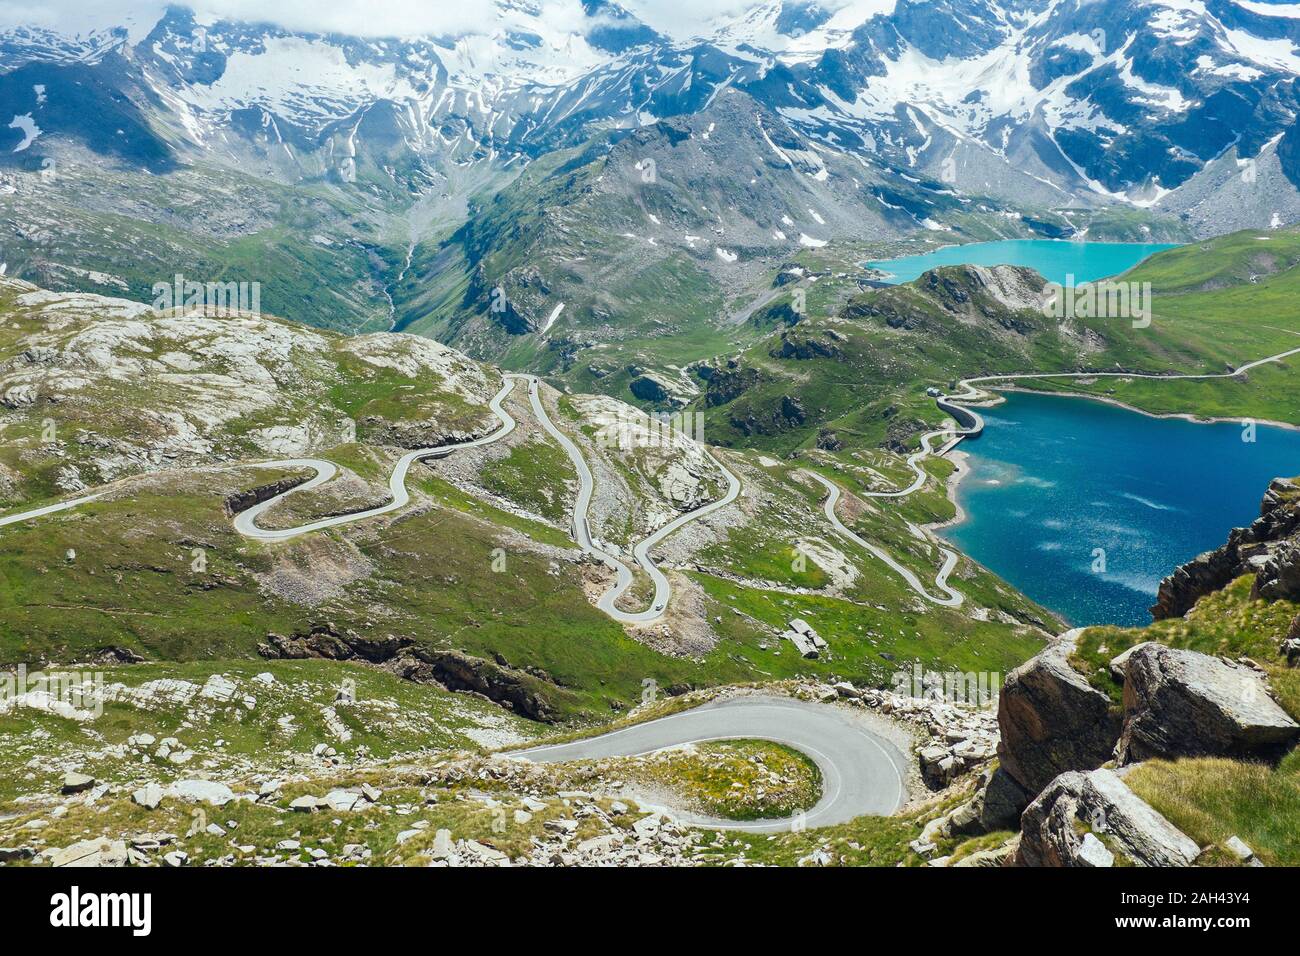 Italy, Piedmont, High angle view of long winding road in Gran Paradiso National Park Stock Photo